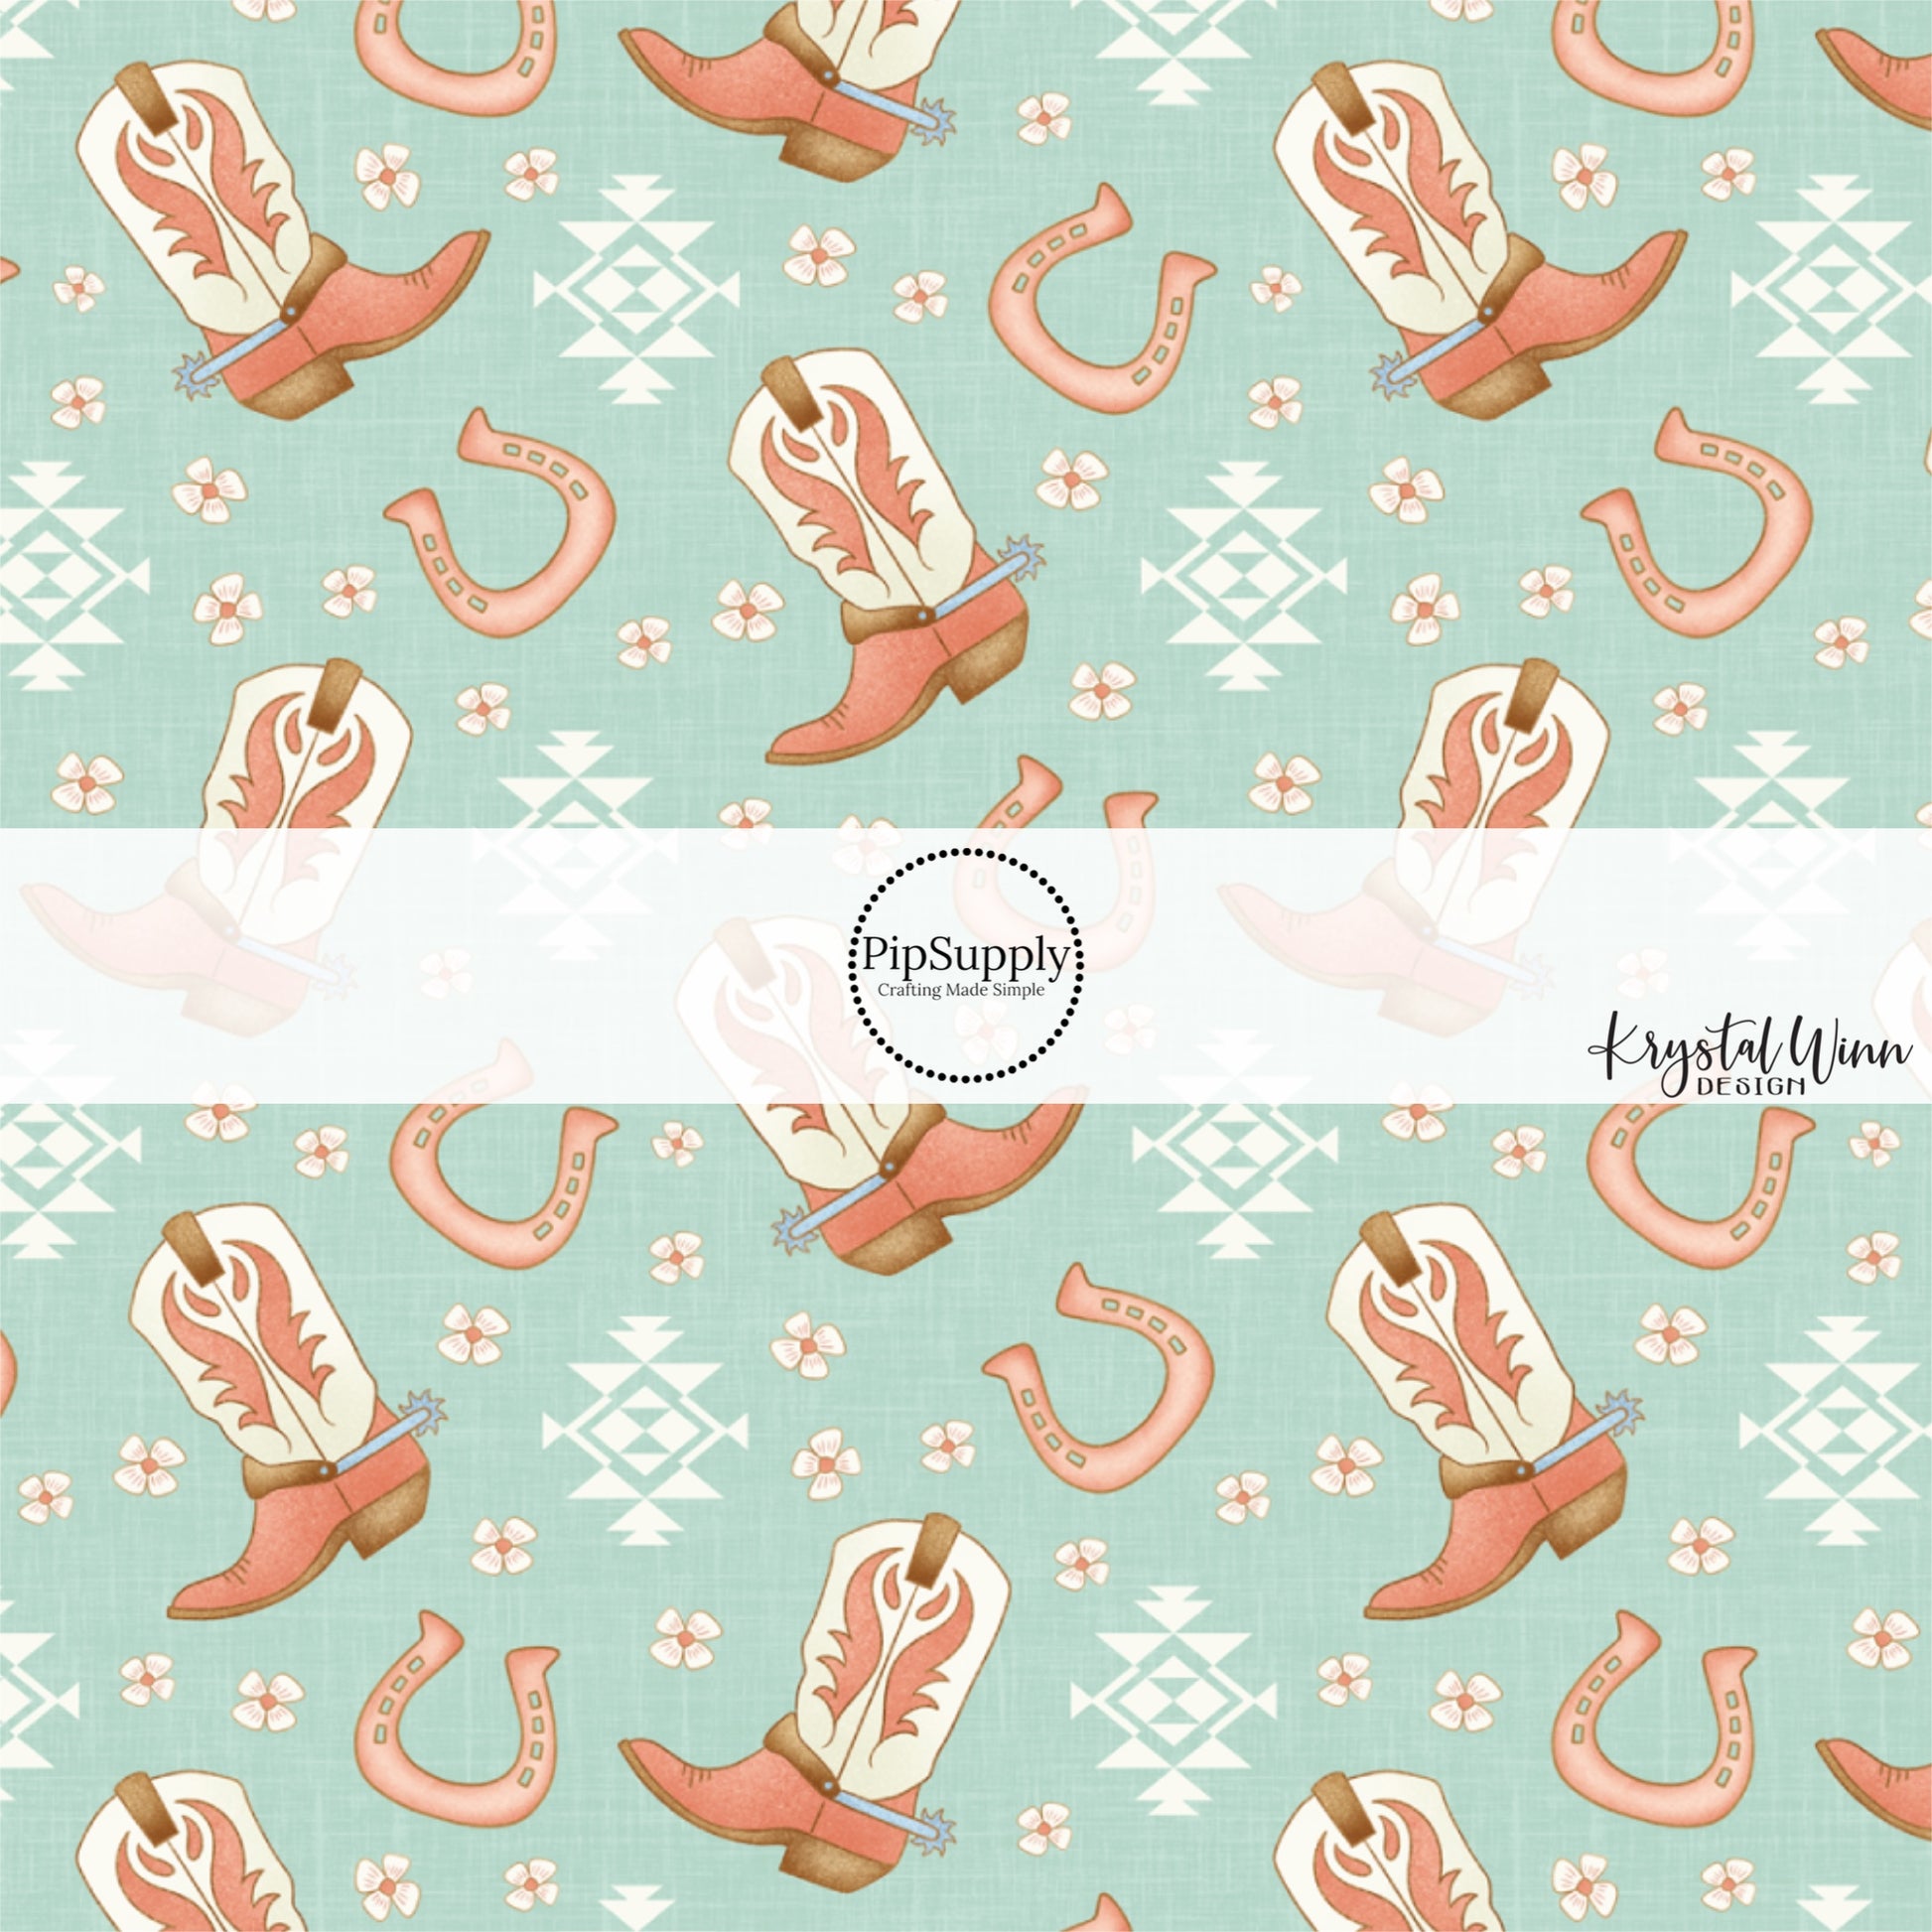 This summer fabric by the yard features cowboy boots on western aqua aztec pattern. This fun summer themed fabric can be used for all your sewing and crafting needs!